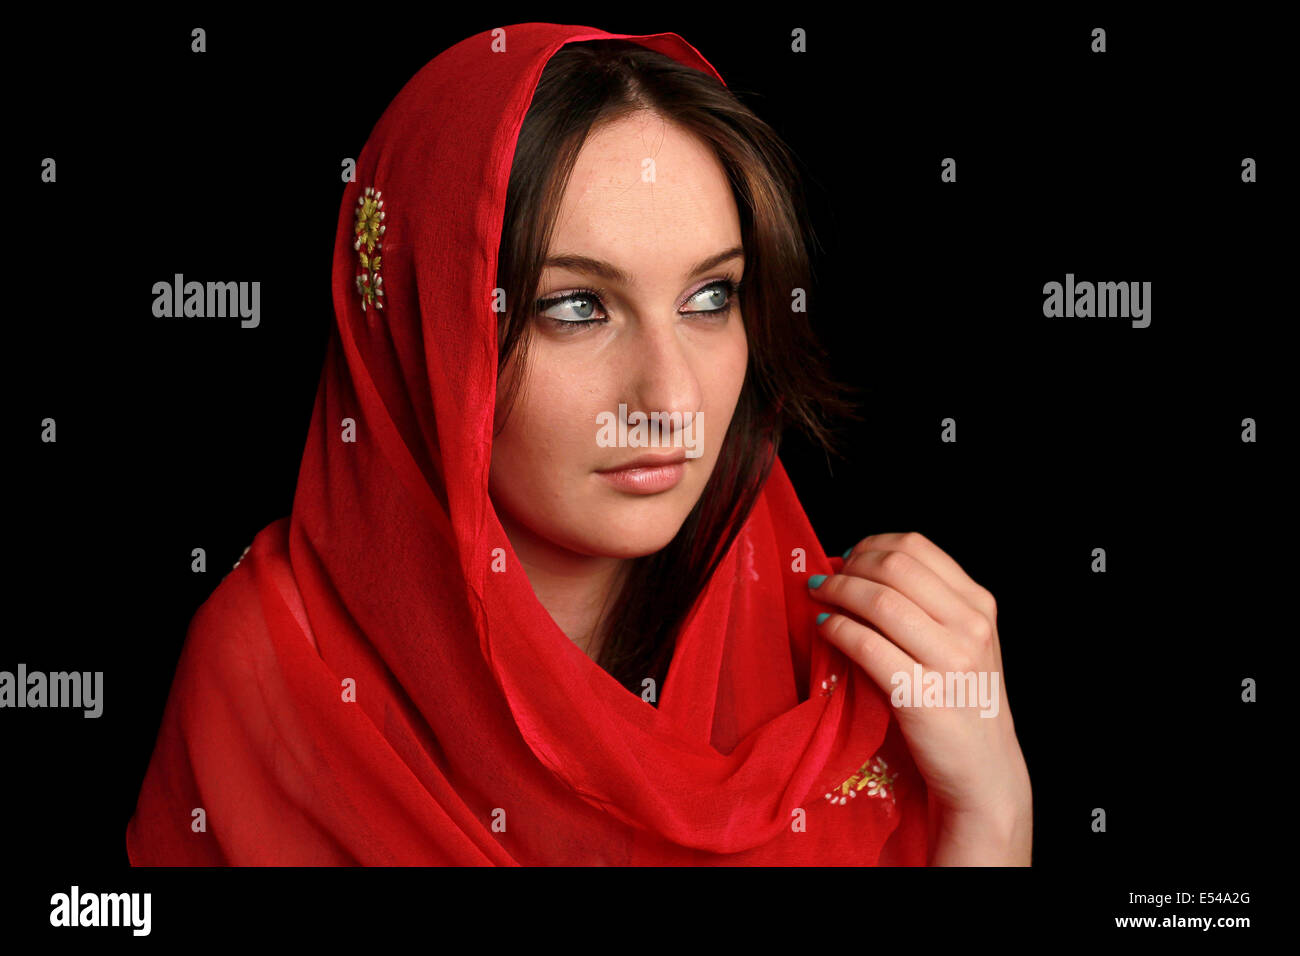 Arab girl with blue eyes wearing a red veil Stock Photo